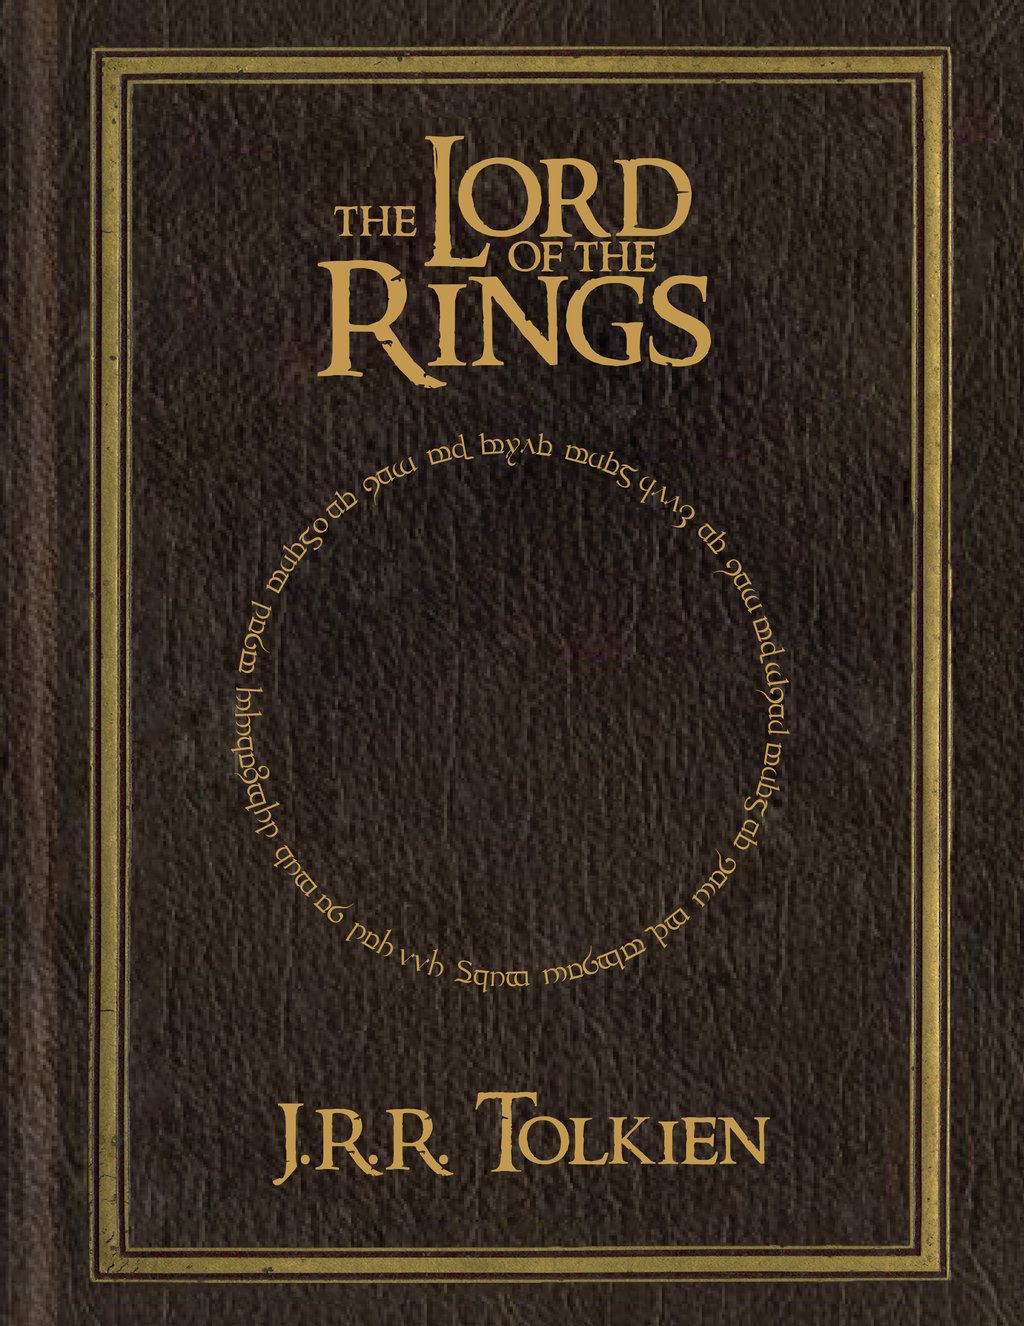 Image result for book the lord of the rings